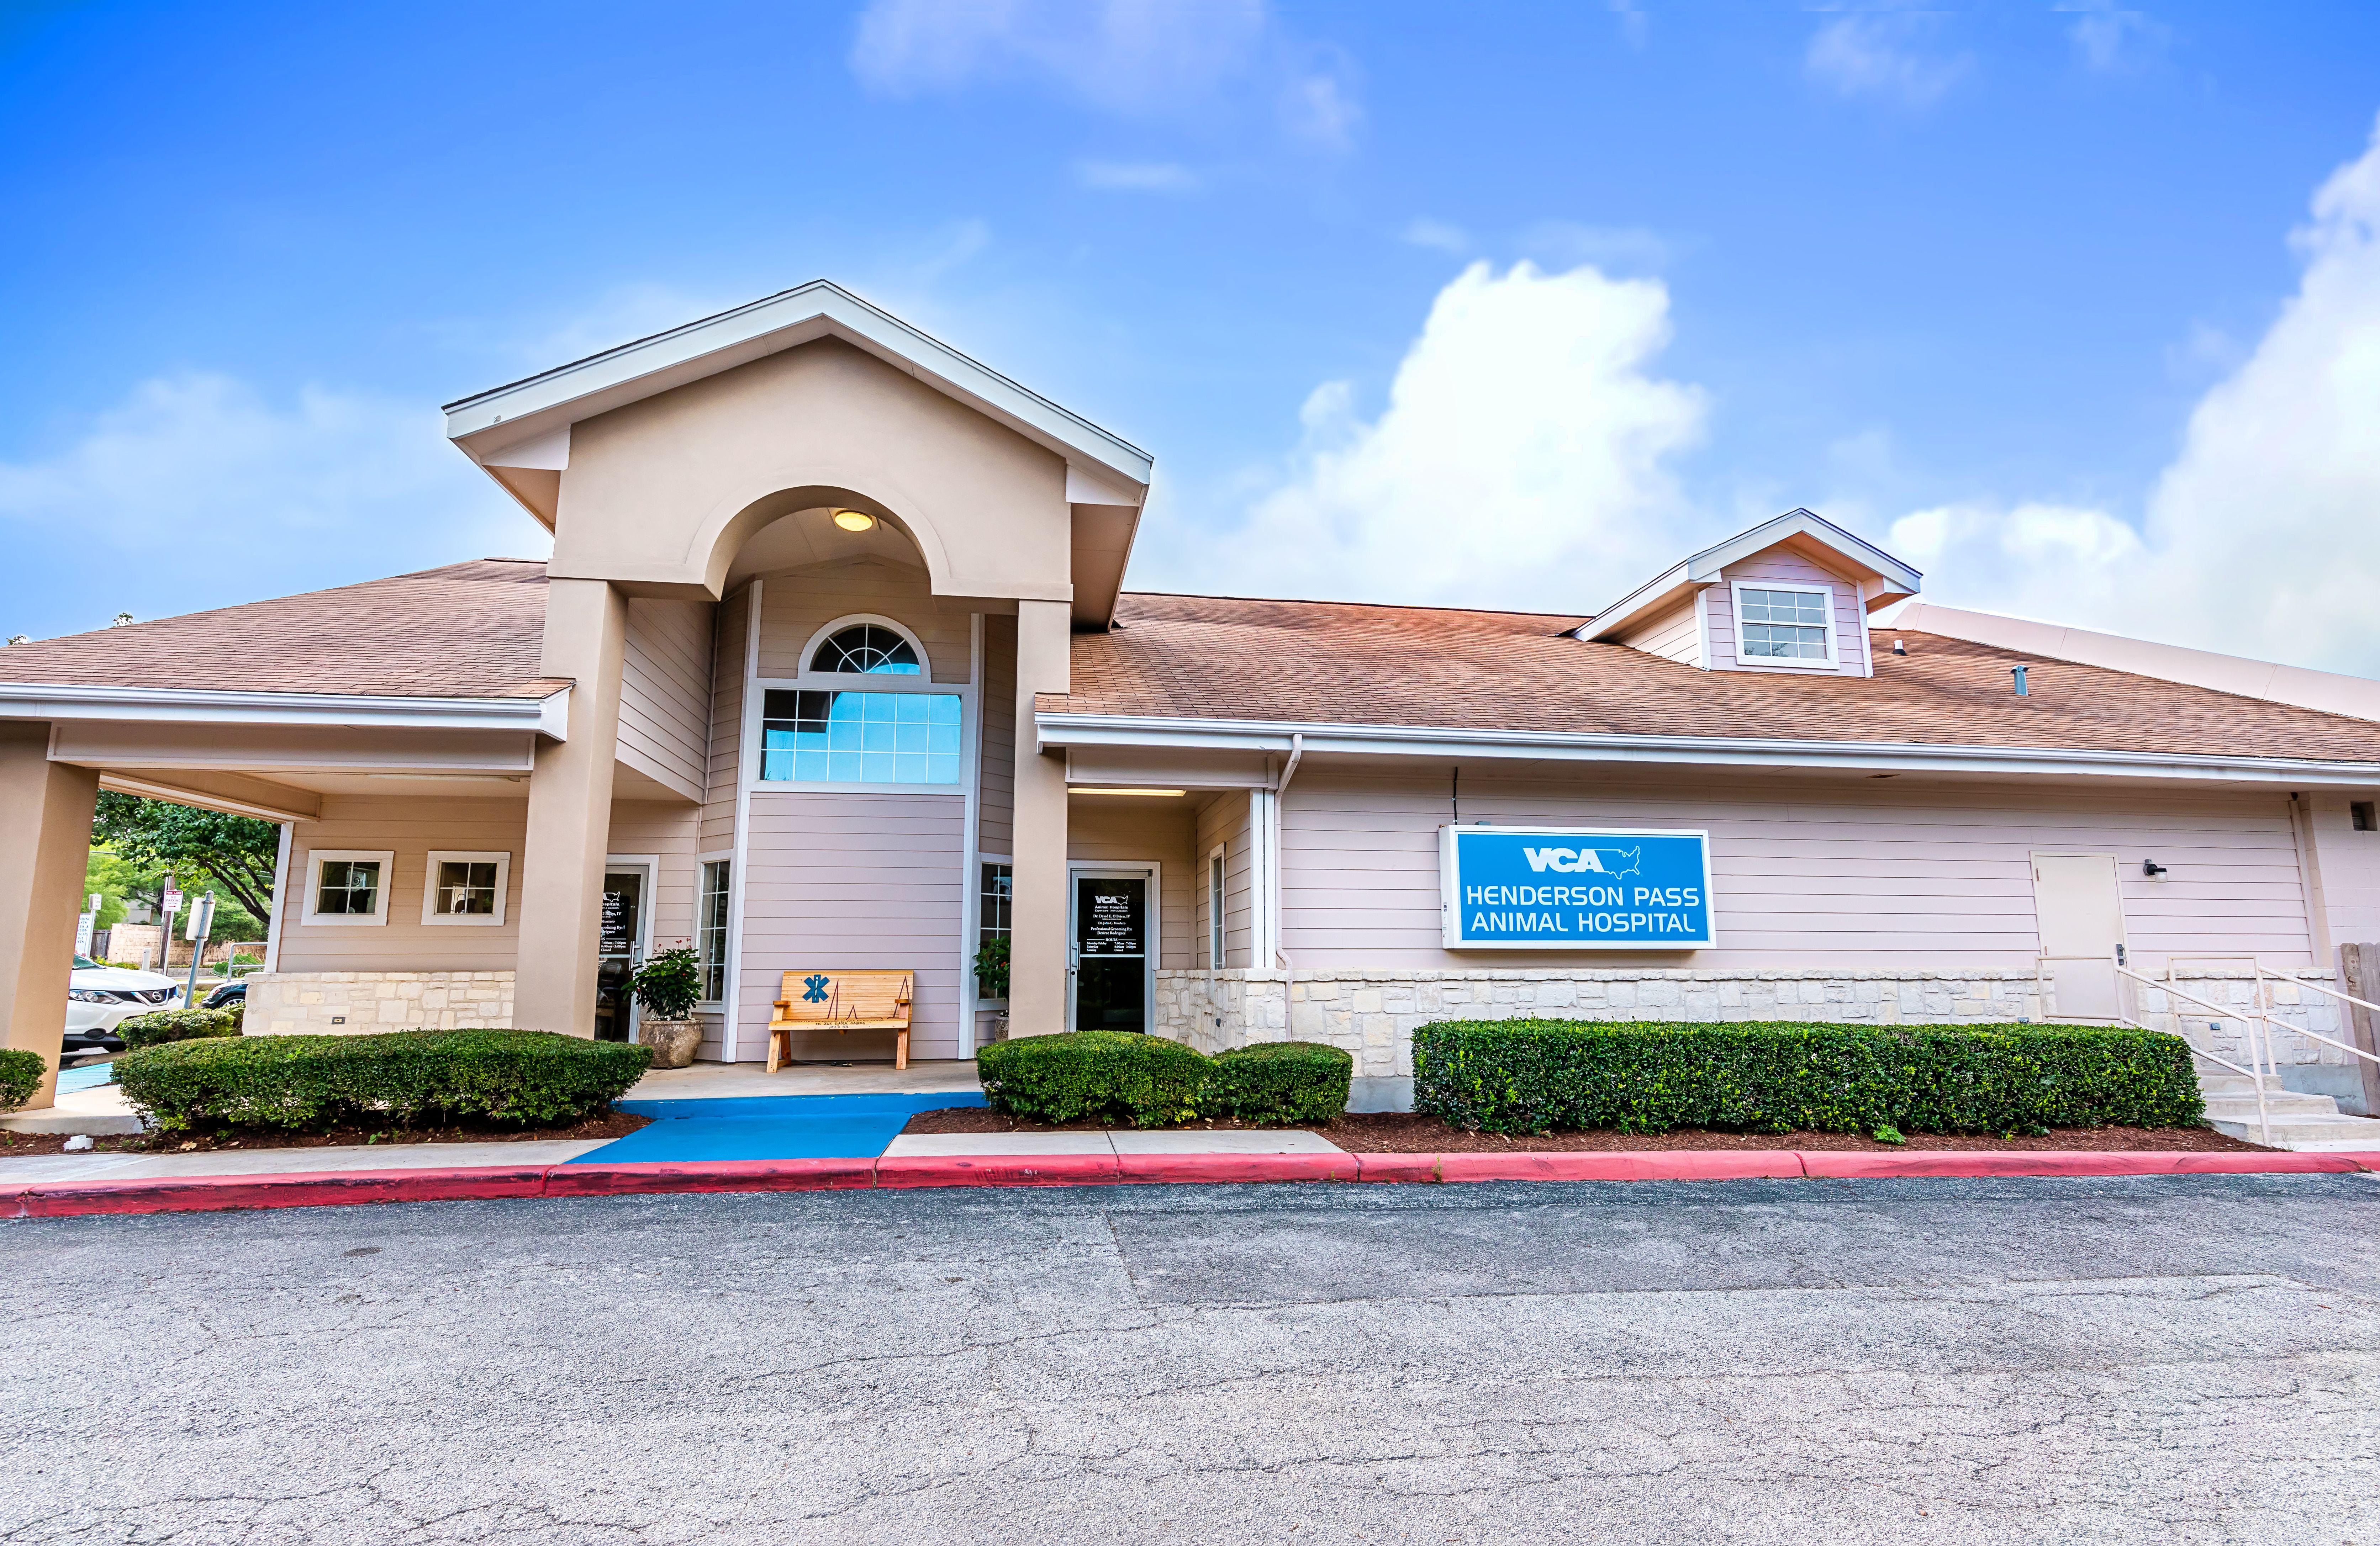 Welcome to VCA Henderson Pass Animal Hospital!